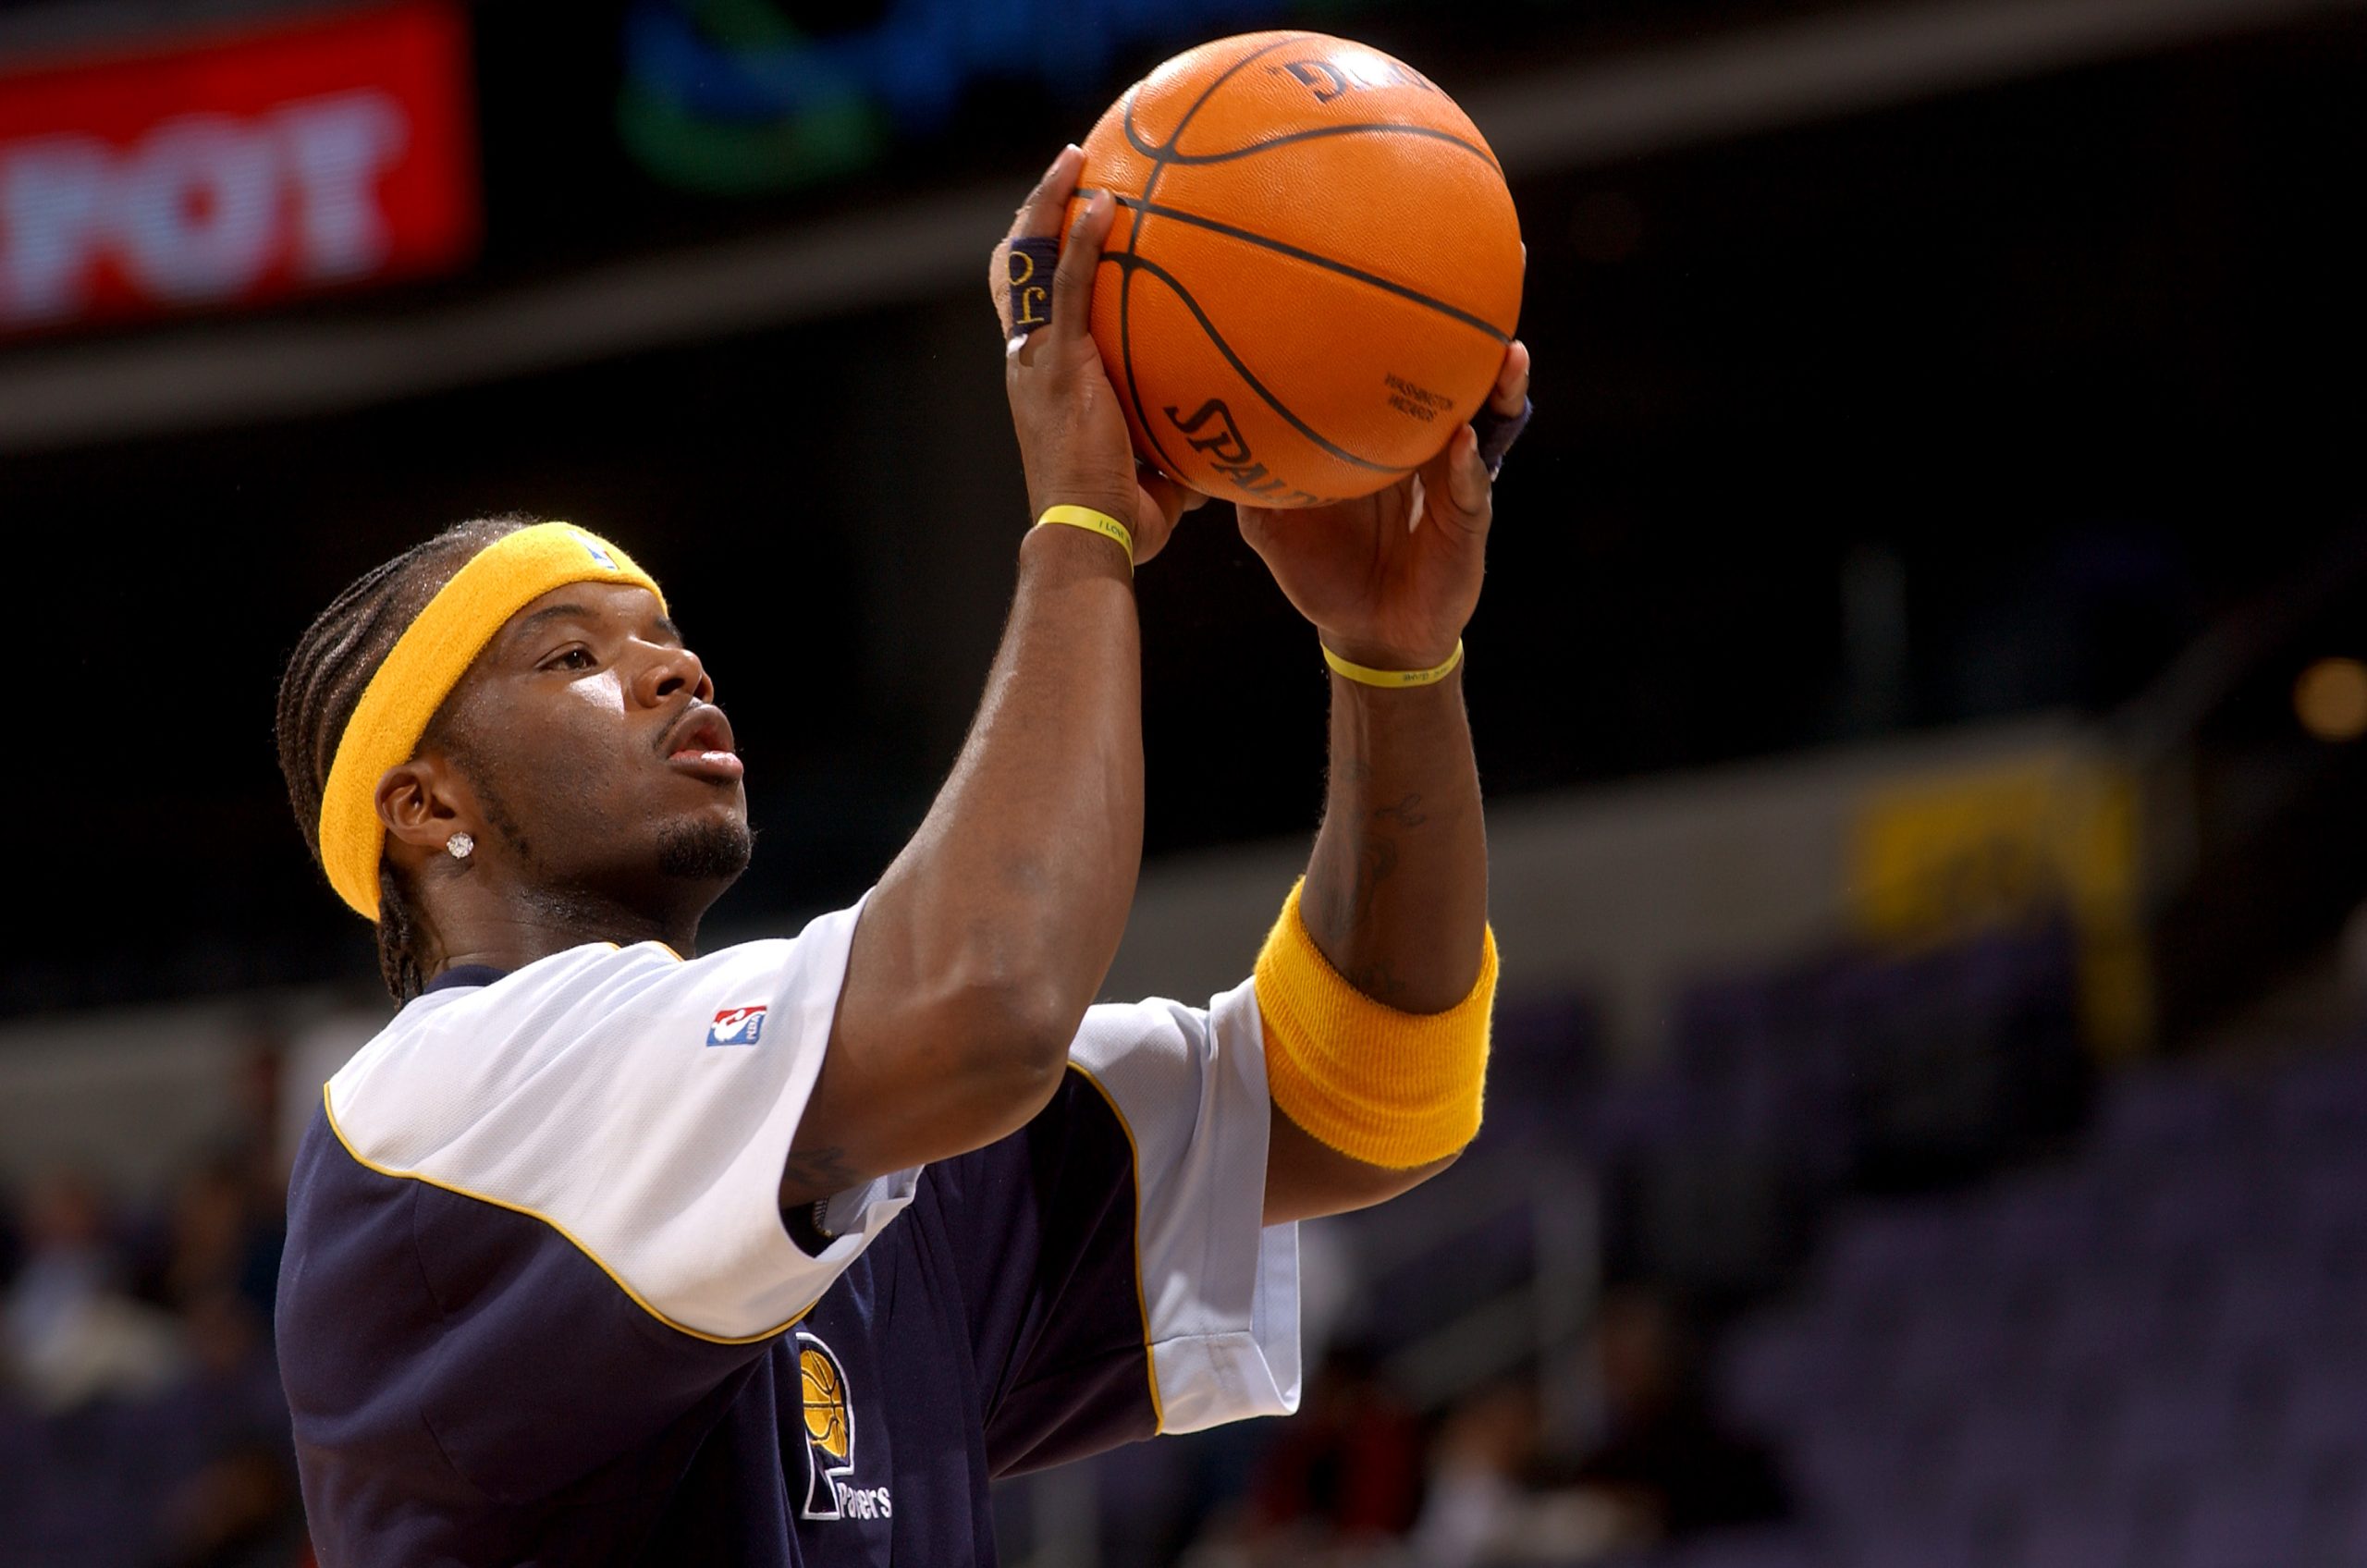 Jermaine O'Neal of the Indiana Pacers warms up before the game against the Washington Wizards on January 4, 2003.